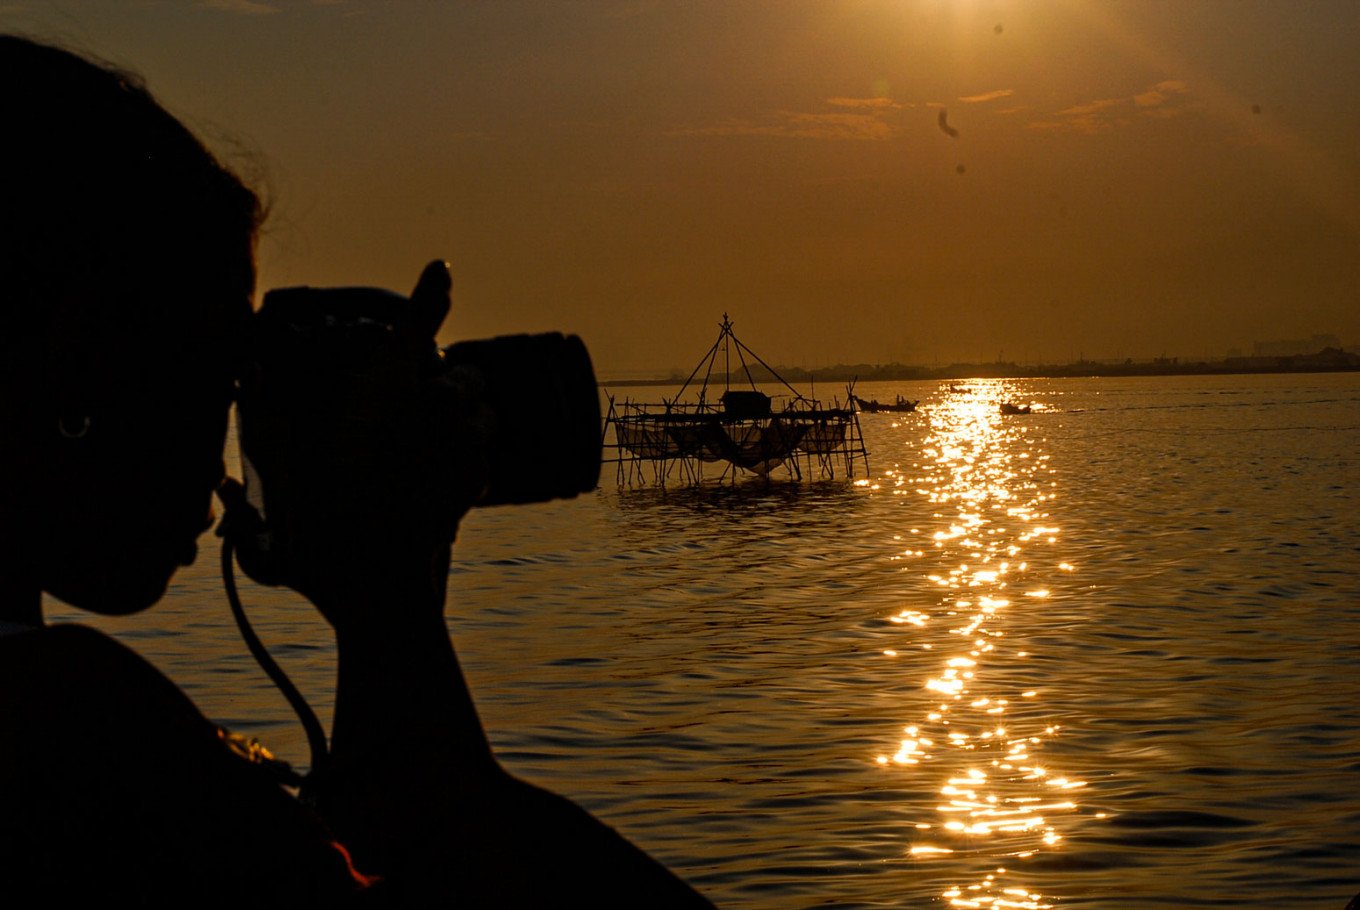 A girl takes photos as the sun sets in North Jakarta (Photo credit: The Jakarta post)